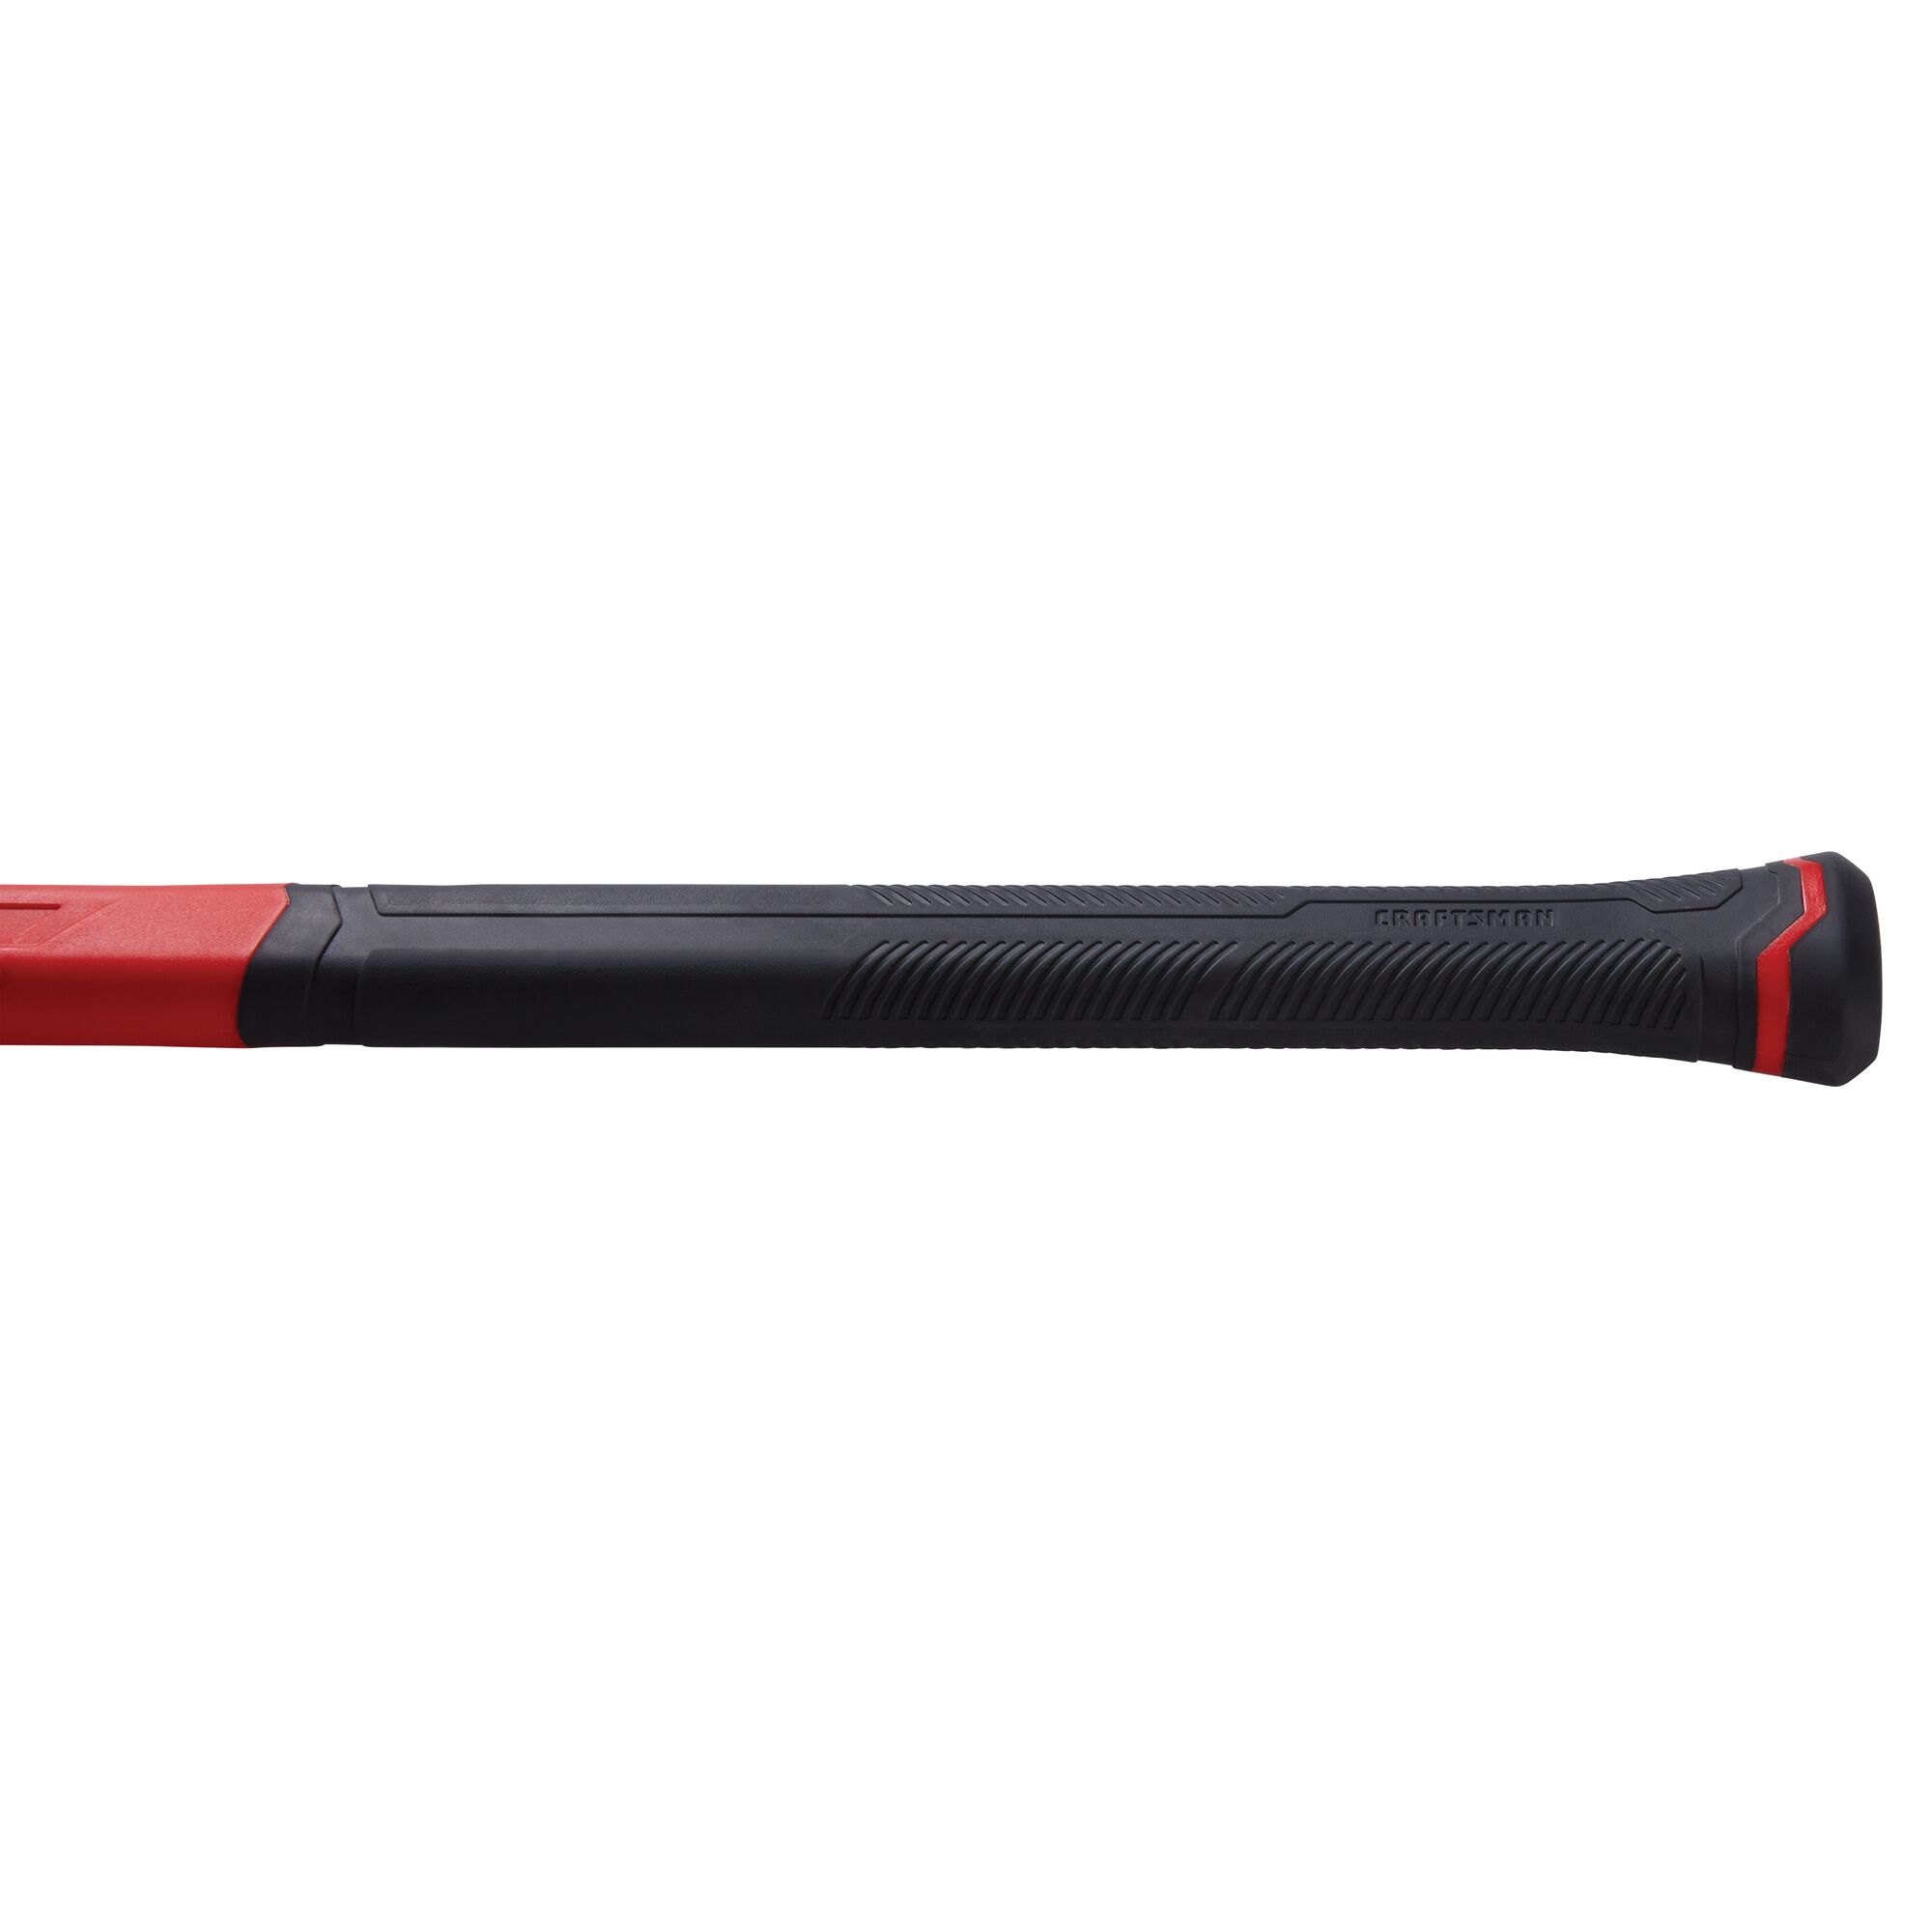 View of CRAFTSMAN Hammers: Dead Blow Hammers: Fiber Grip highlighting product features